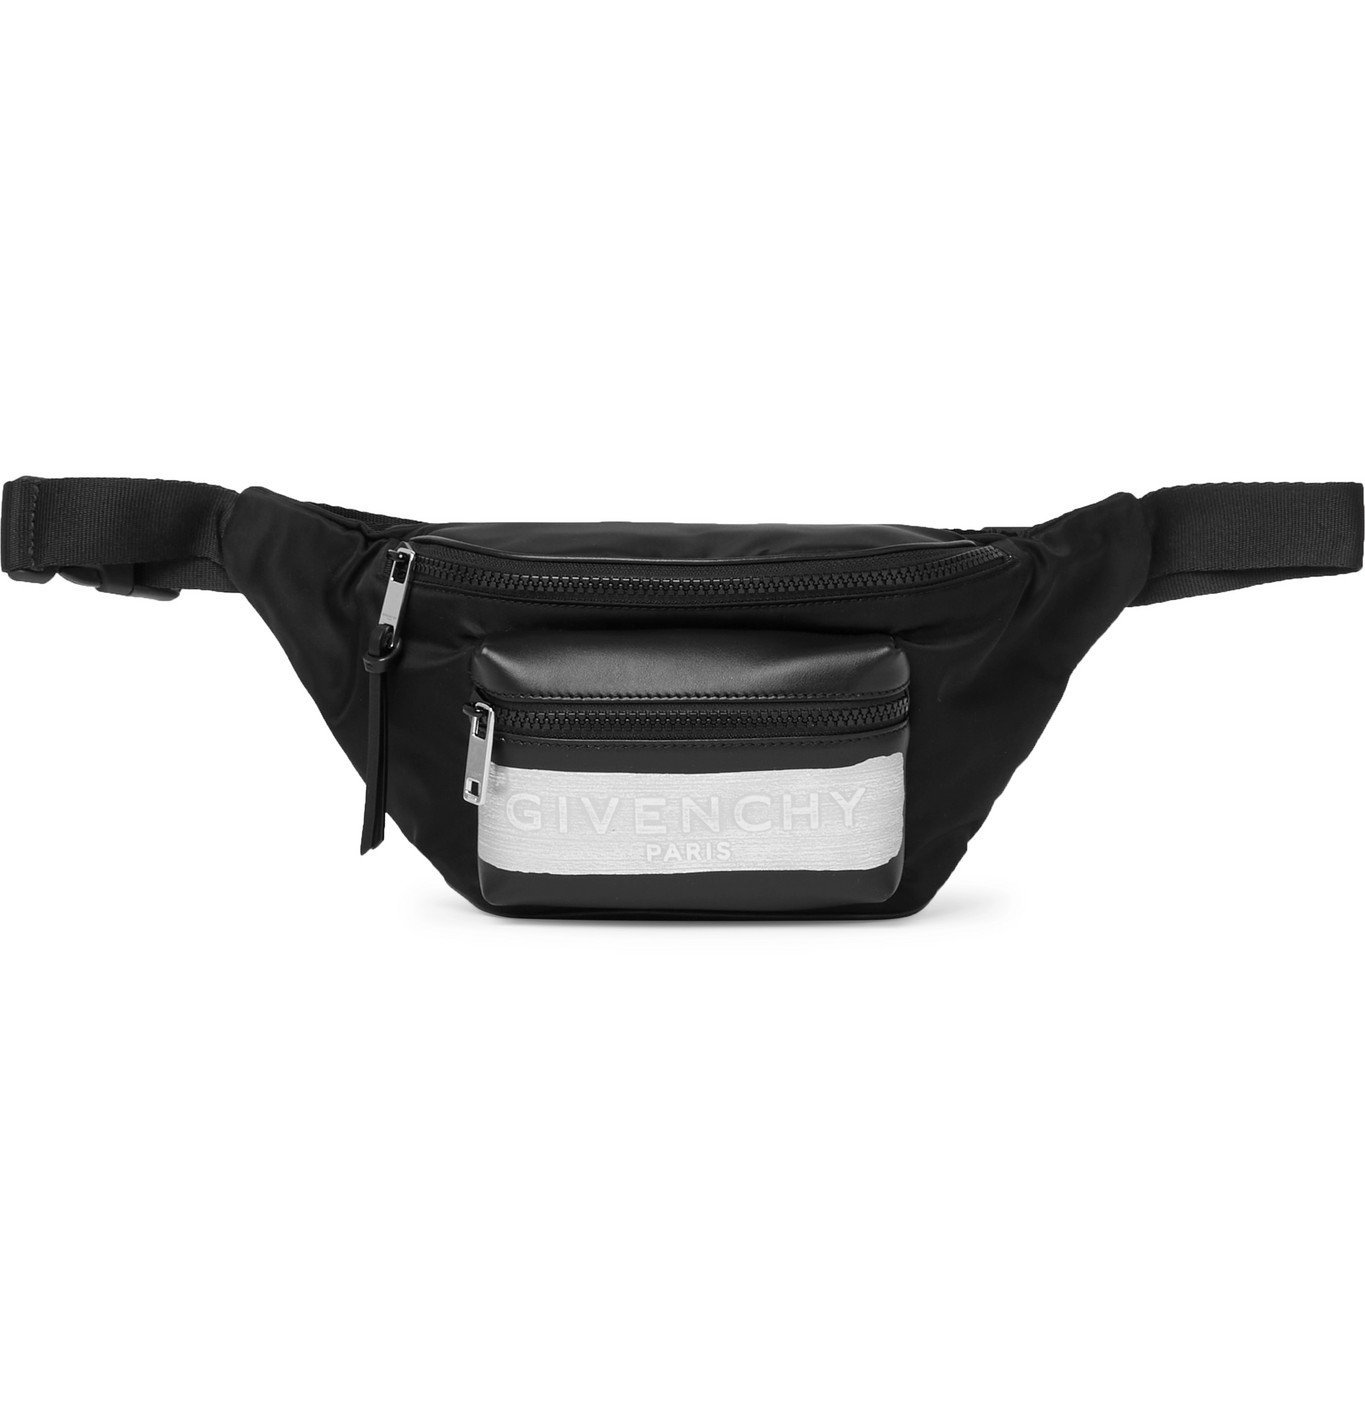 GIVENCHY - Logo-Detailed Leather and Shell Belt Bag - Black Givenchy